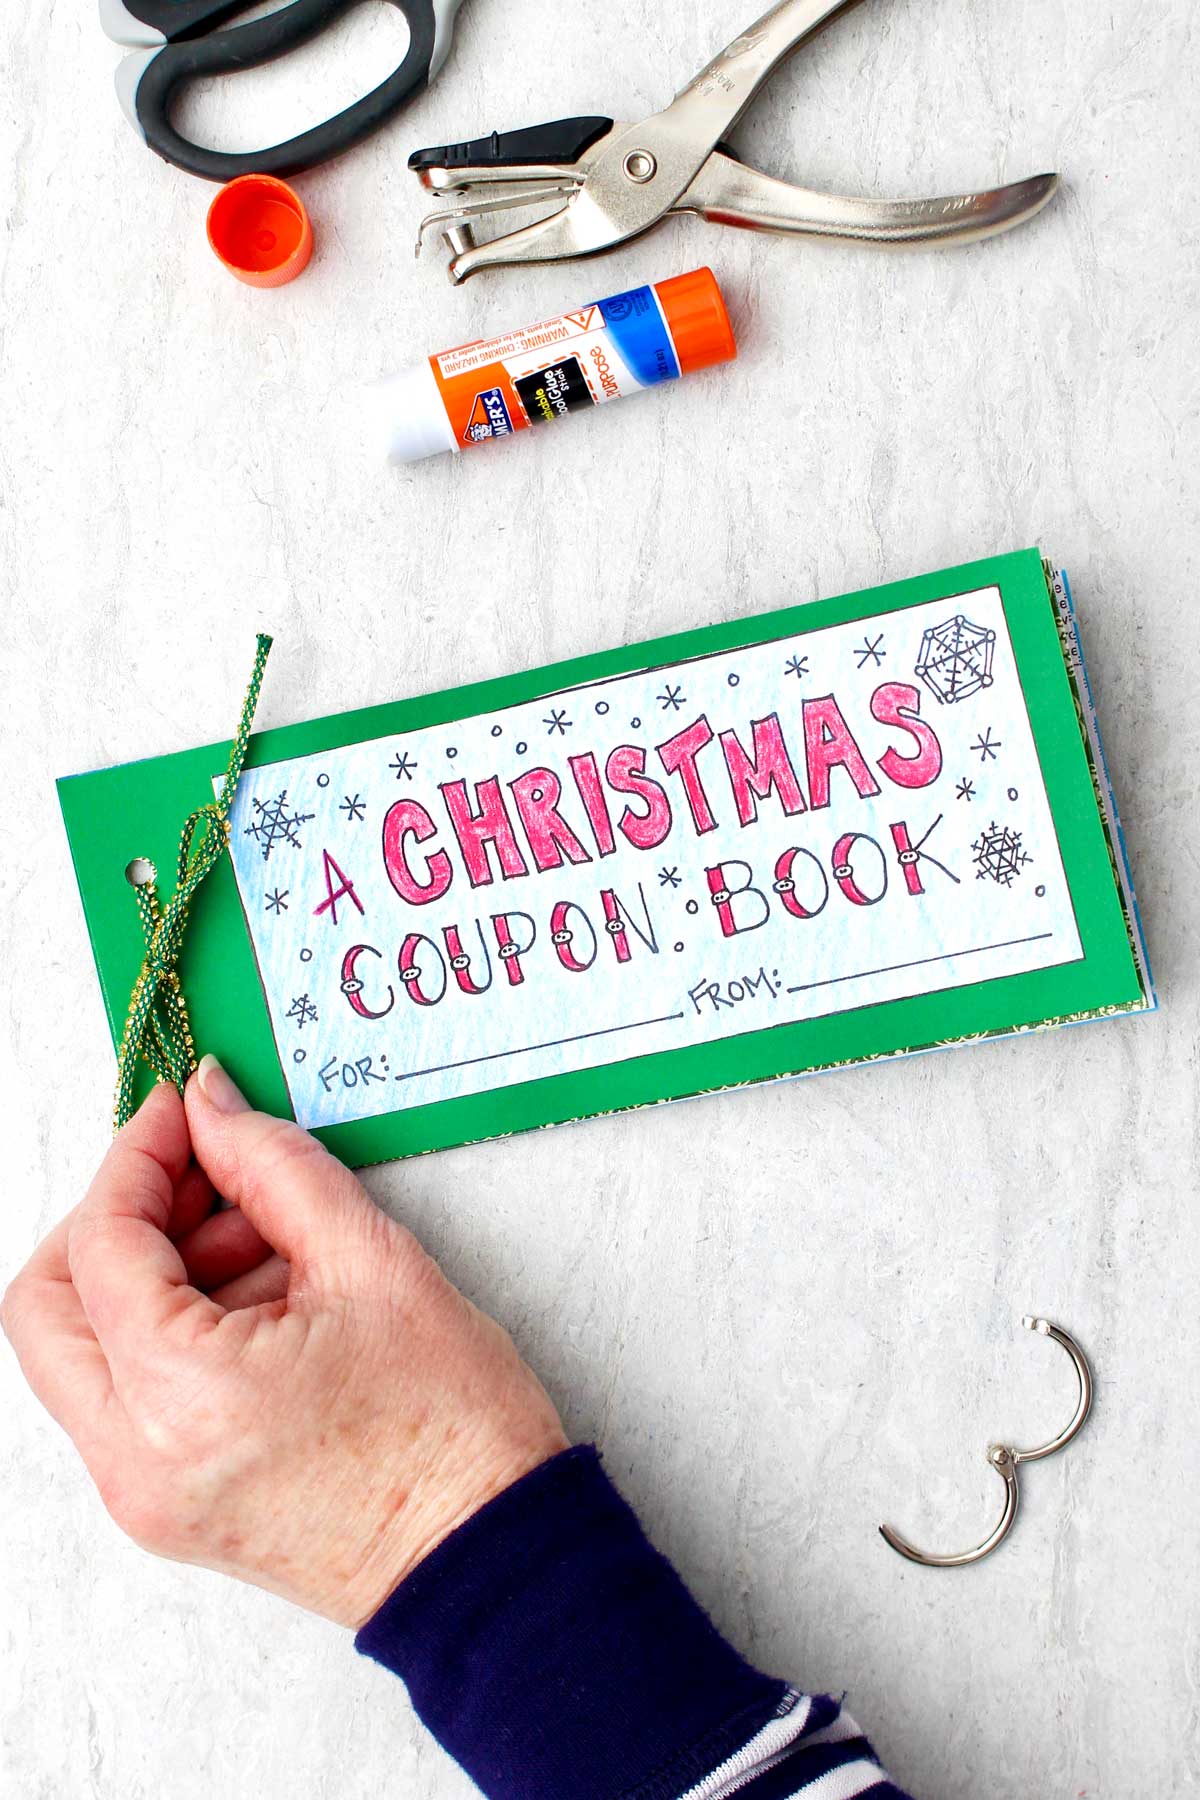 A finished printed and decorated Christmas coupon book tied together with green string.